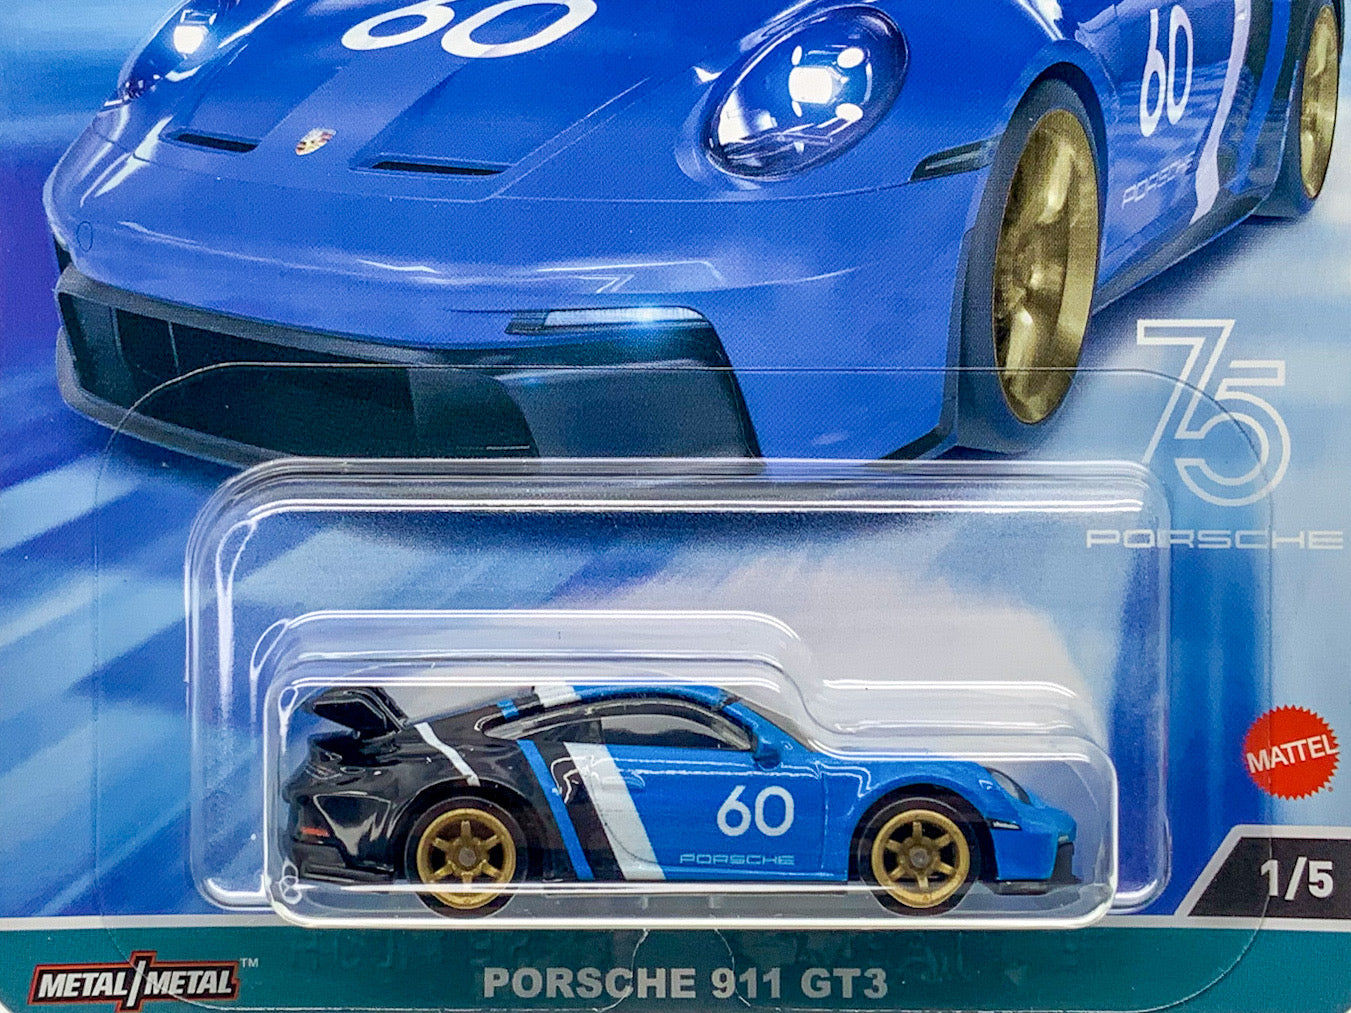 Buy at www.tatoyshop.com Hot Wheels Car Culture  2023 Hot Wheels Car Culture Speed Machines Series Porsche 911 GT3 (2022) 1/5  Number 1 from the set of 5 Speed Machines Series Premium Real Riders Metal Mattel FPY86 Shop Now   International and Domestic delivery by Australia Post 